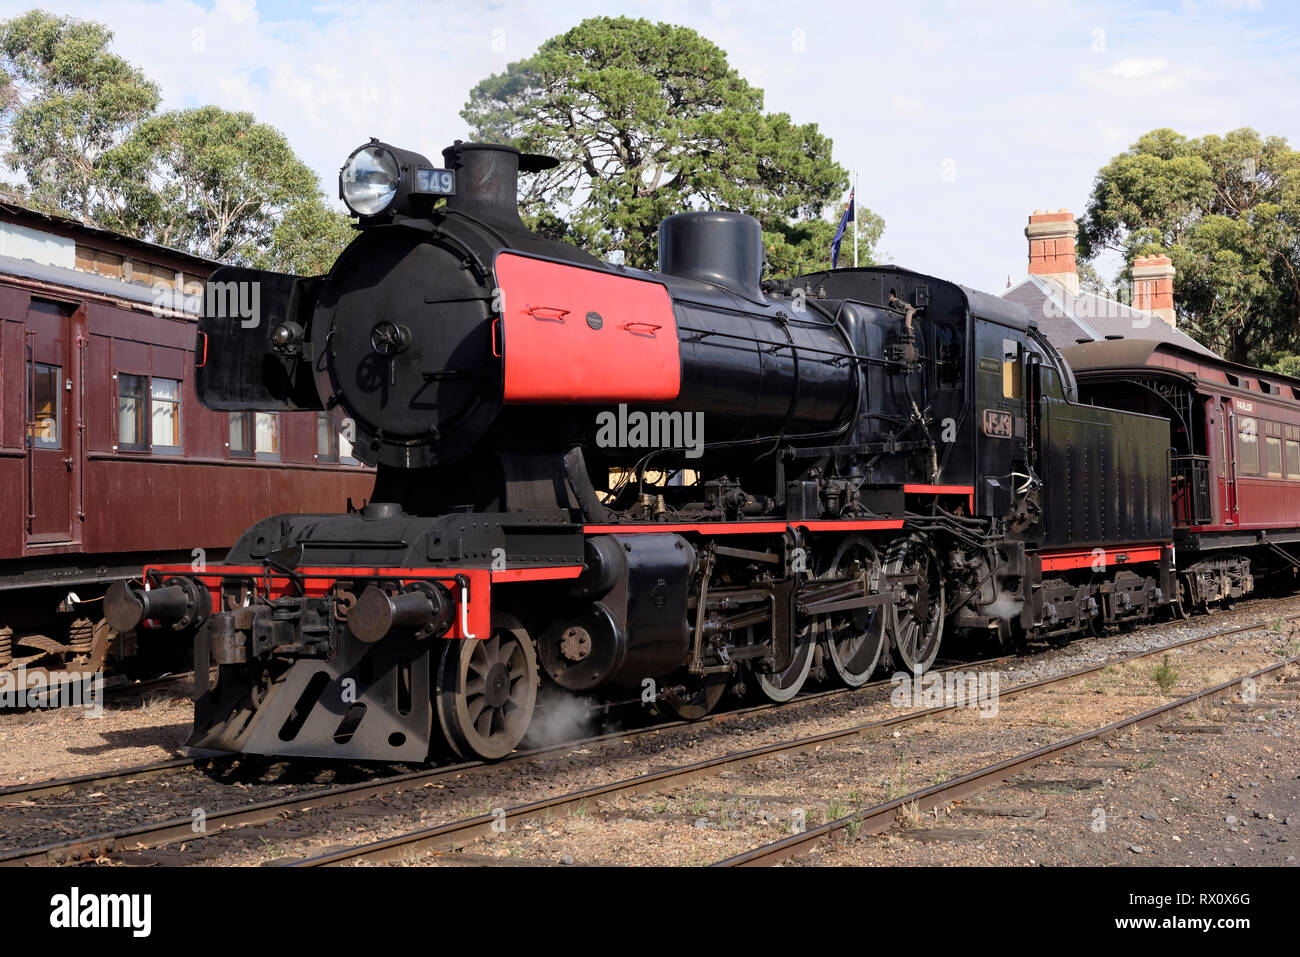 The J549 oil burning steam locomotive built in 1954 by the British locomotive builder Vulcan Foundry Limited, Maldon railway station, Victoria, Austra Stock Photo